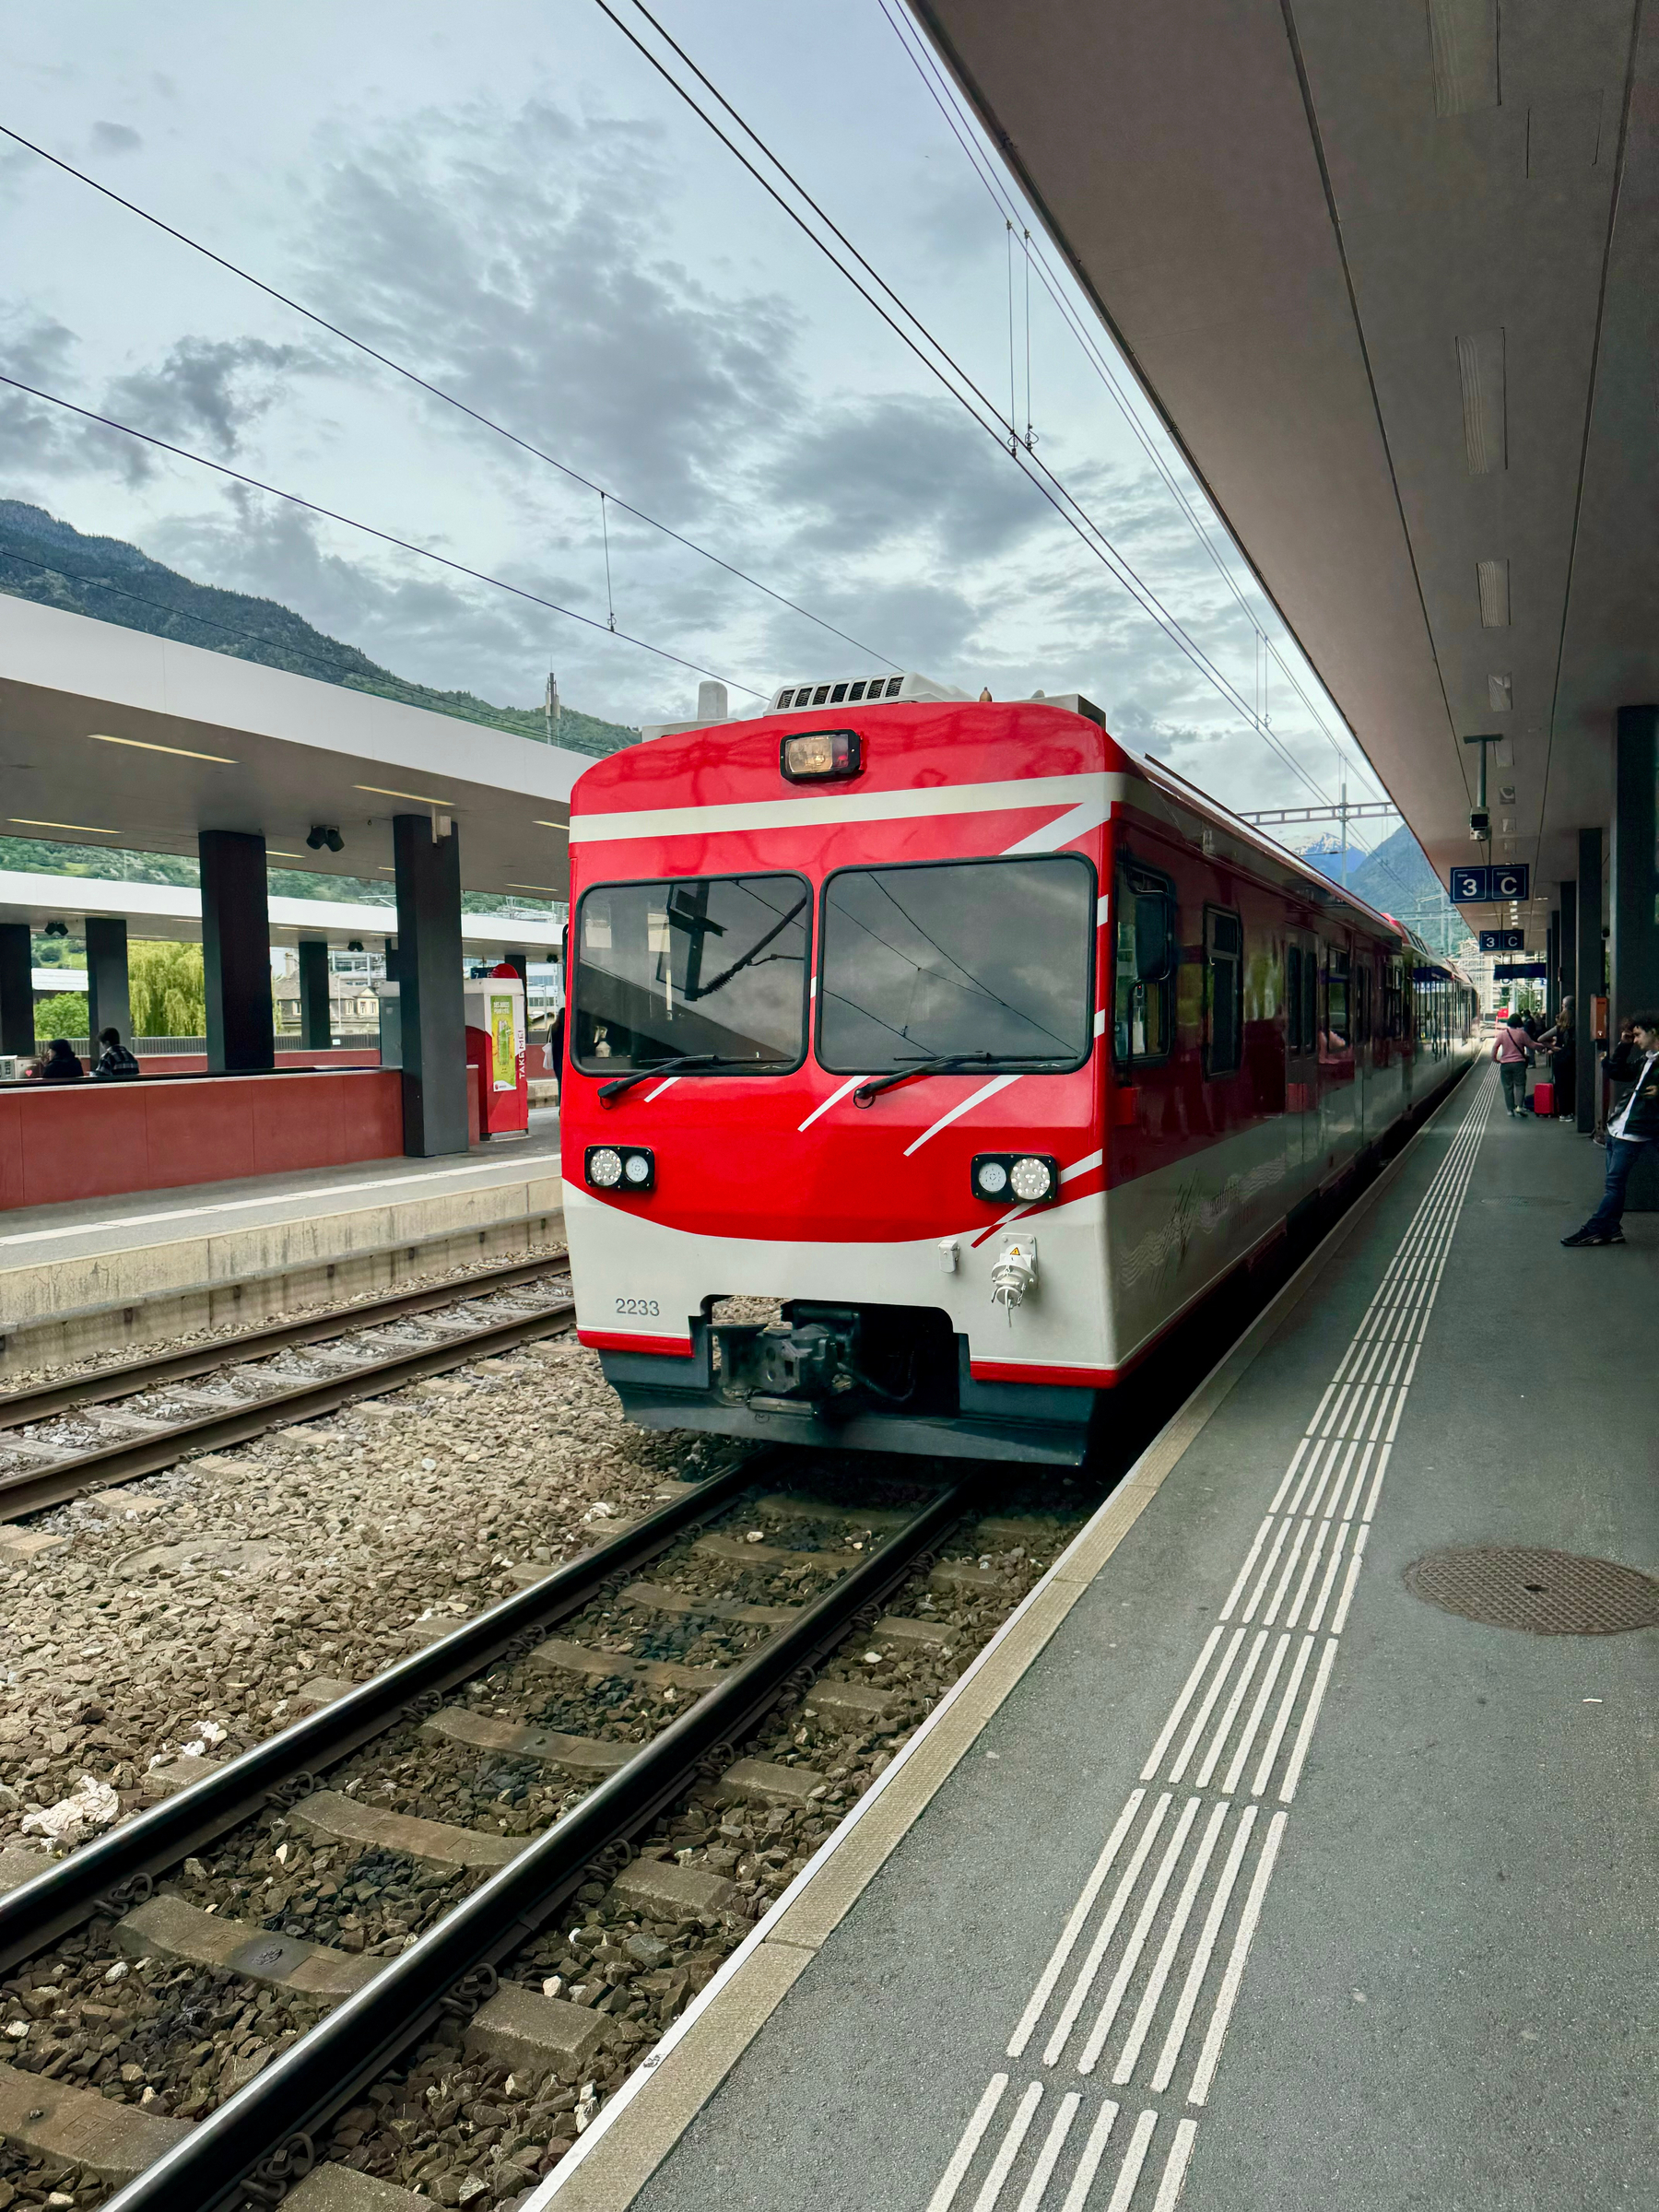 A red and white train at a platform with mountains in the background and a partly cloudy sky above.